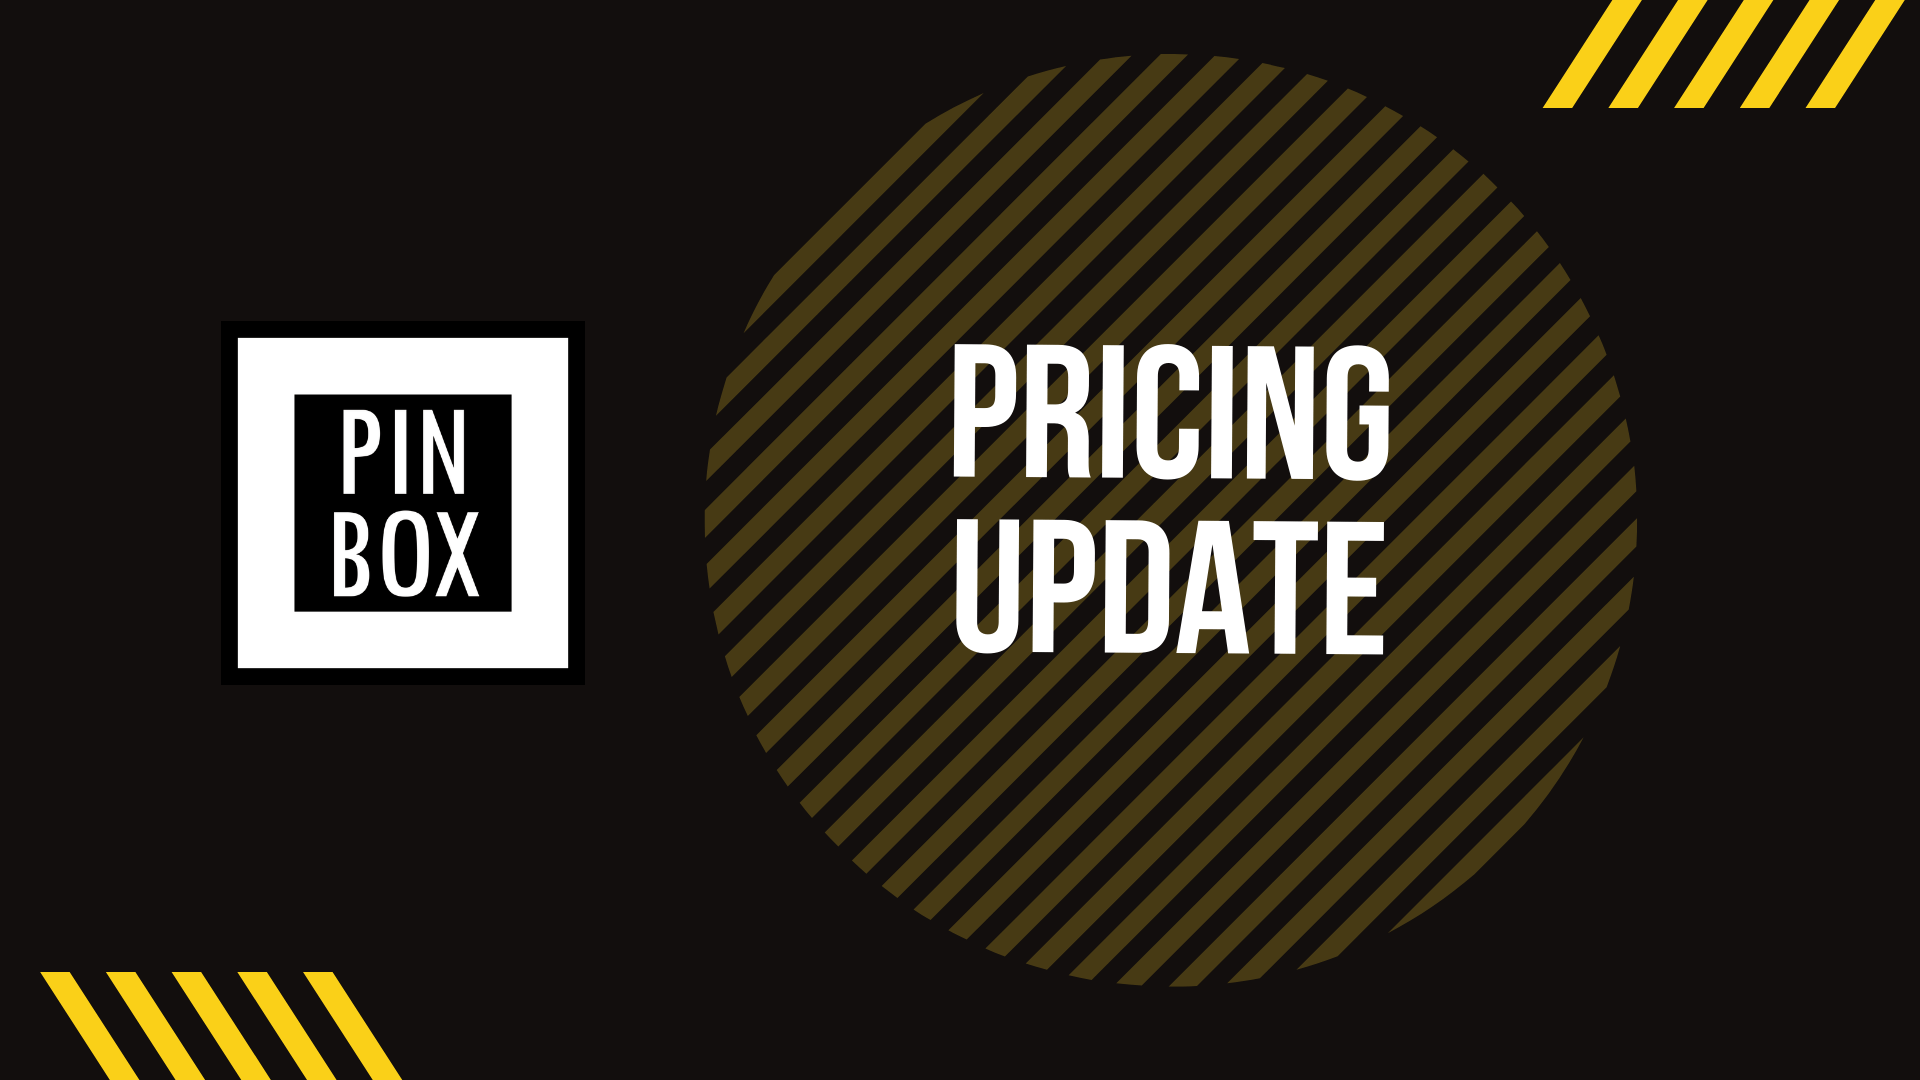 An Update on Pricing in 2022